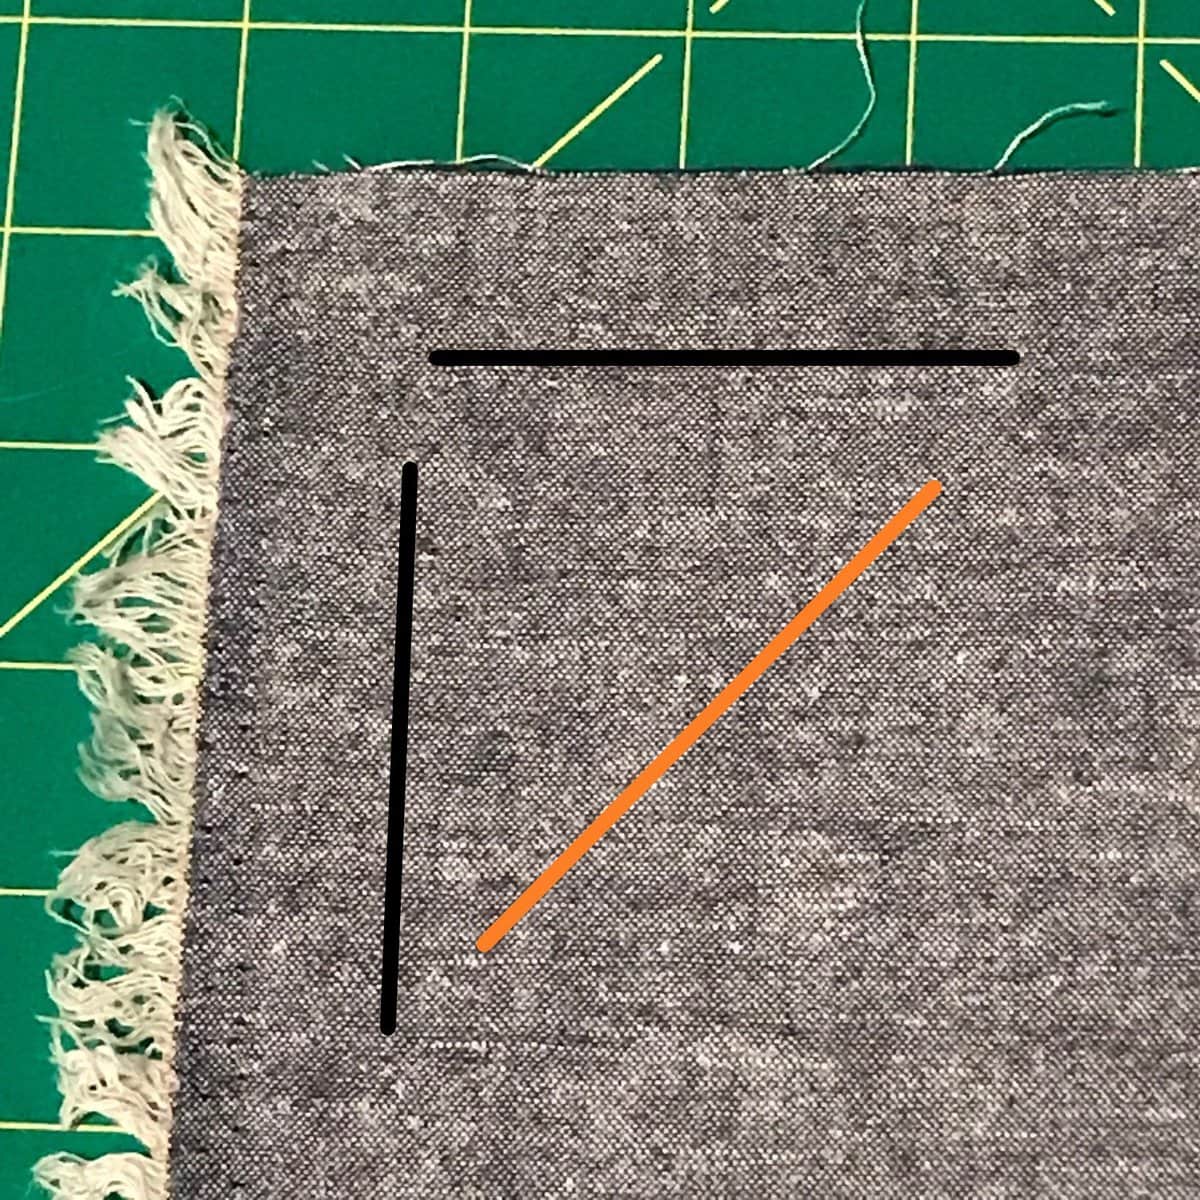 image description: a small piece of fabric, with raw edges visible; an orange line is draw on top, at a 45 degres angle to the edges; two black lines follow the lines of the edge, they are perpendicular to each other